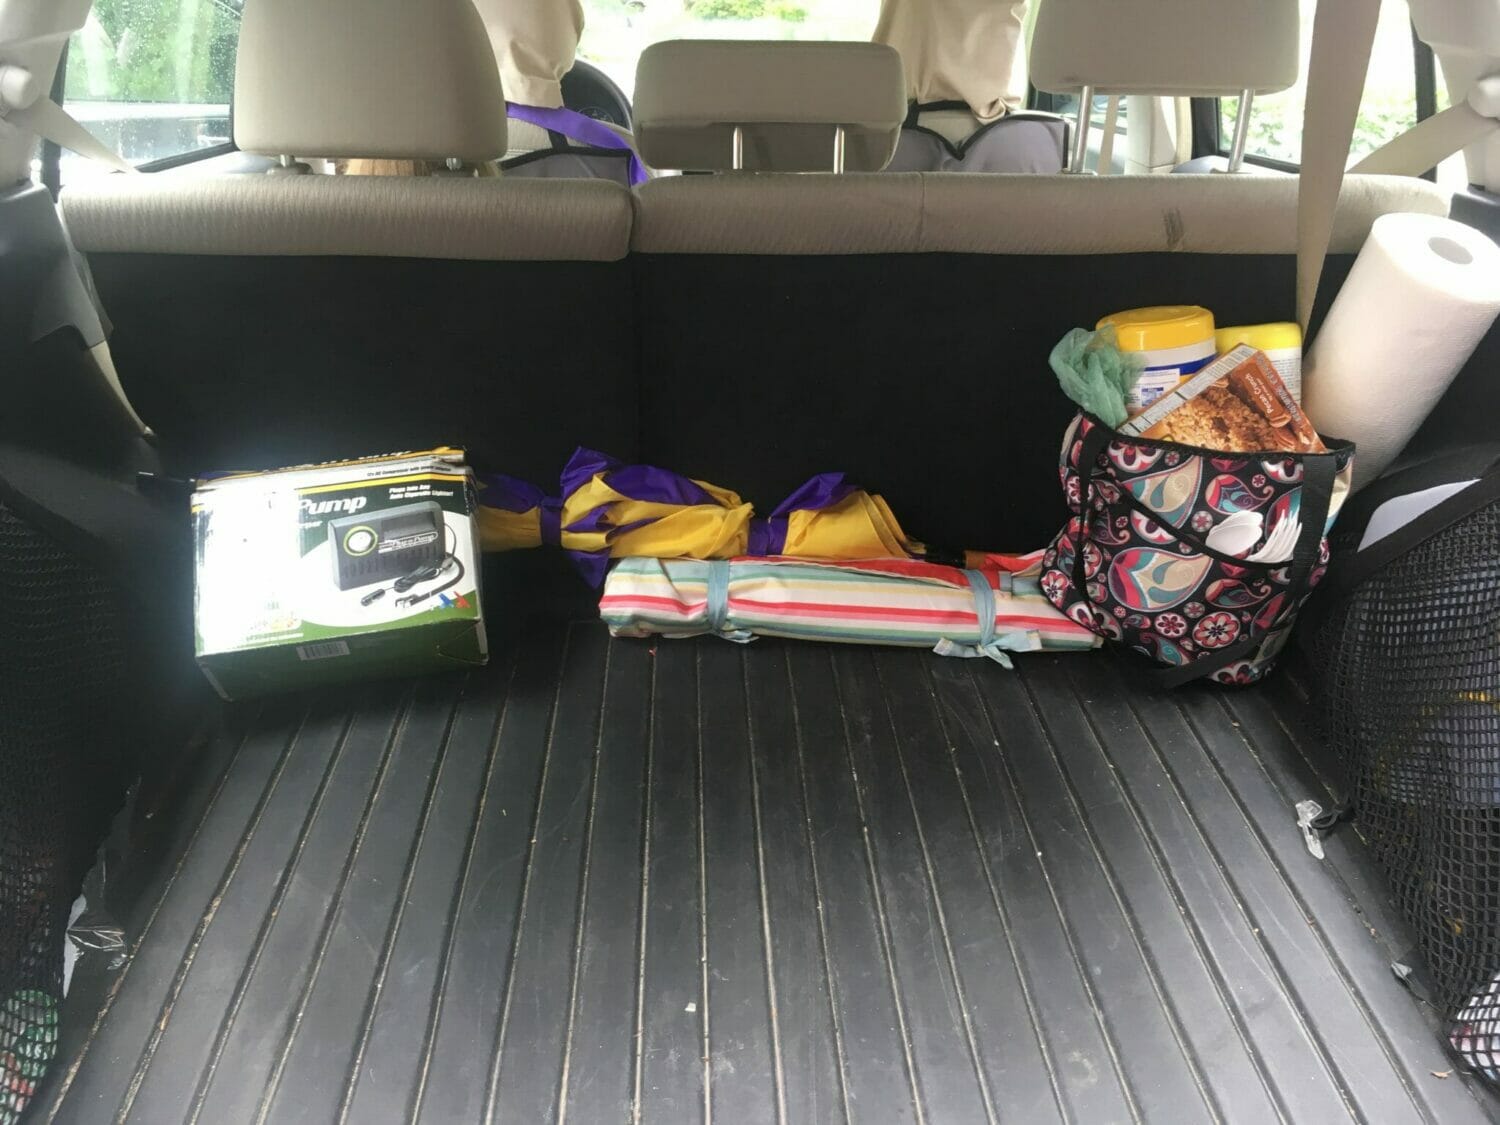 Summer Car Essentials Kit for a Family with Kids 